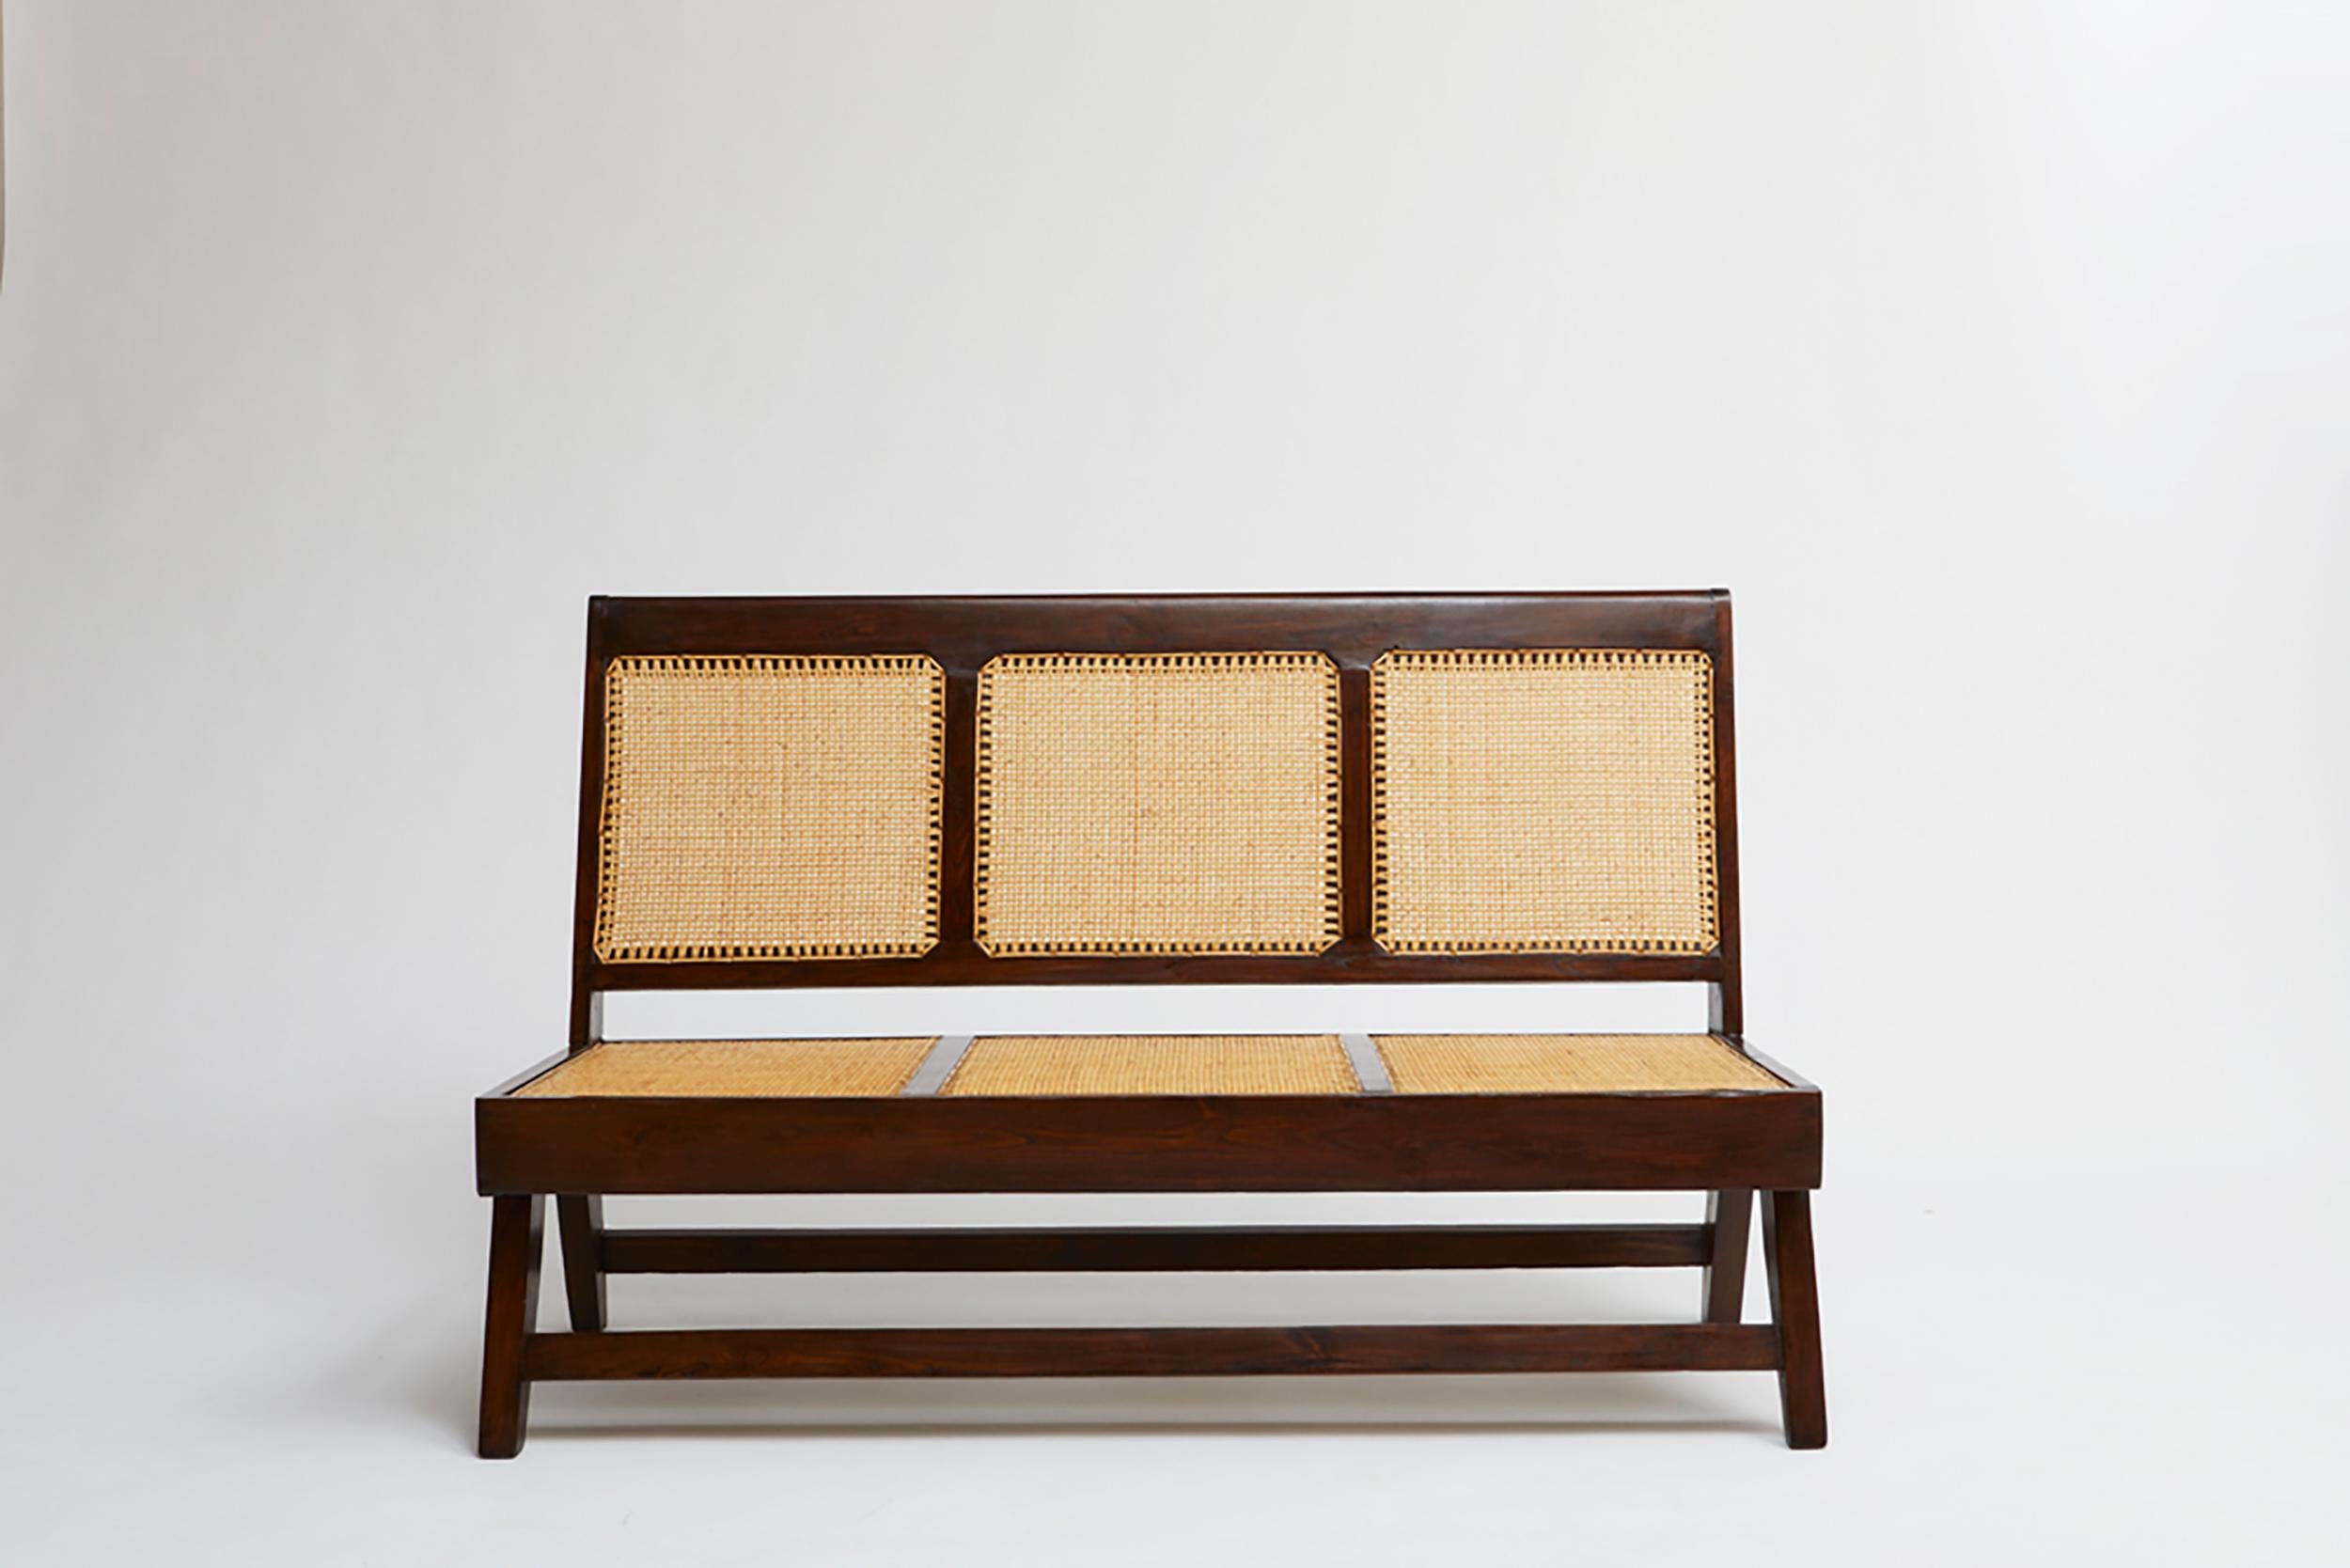 This three seat sofa is by Pierre Jeanneret circa 1955-56. It is made from teak and woven cane and originally designed for Jeanneret's project in Chandigarh, India.